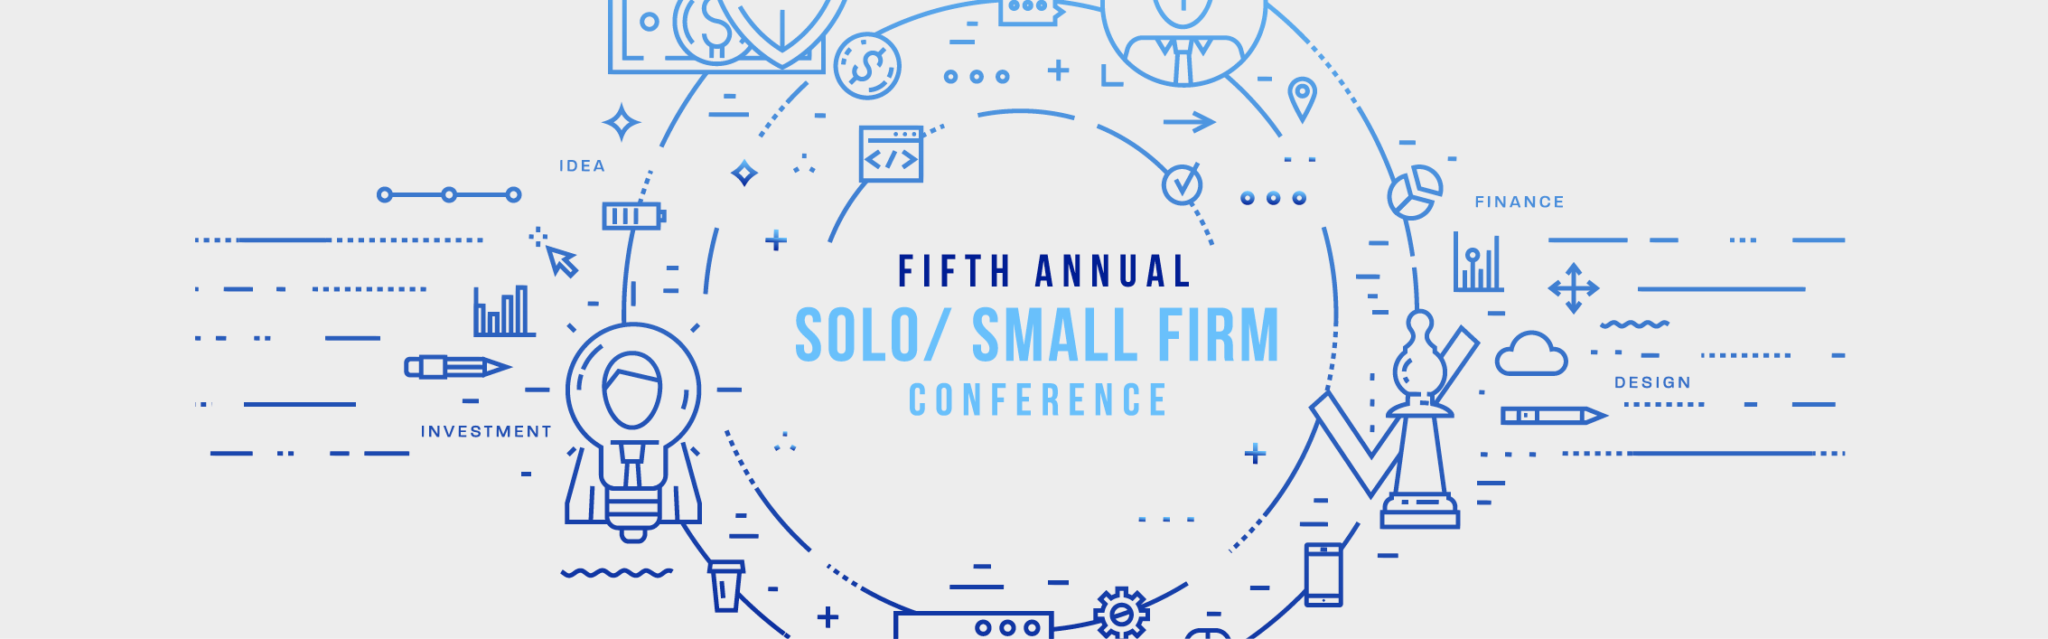 Solo and Small Firm Practitioners Gathered Virtually for Fifth Annual